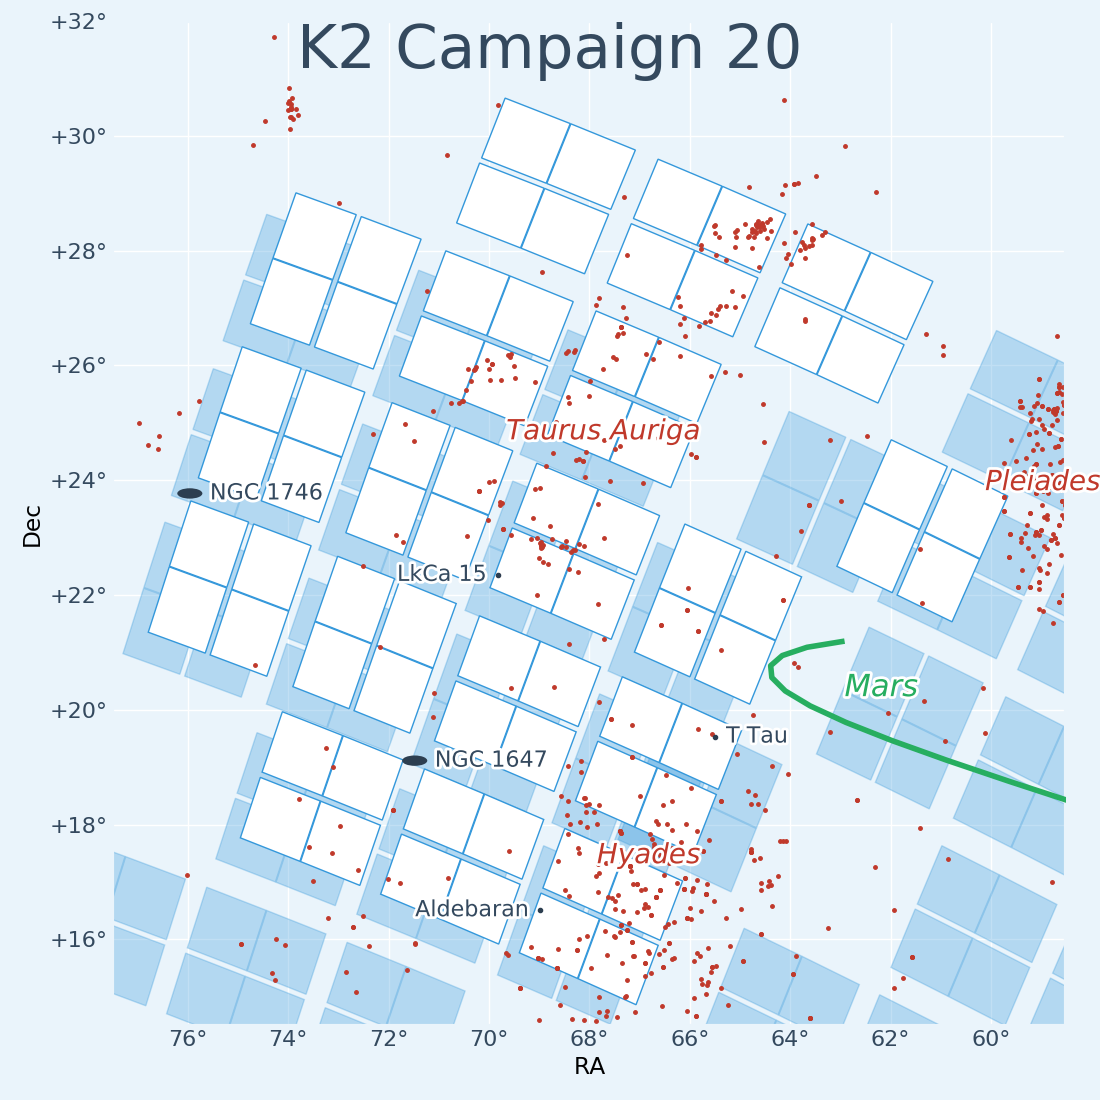 Footprint of K2 Campaign 20